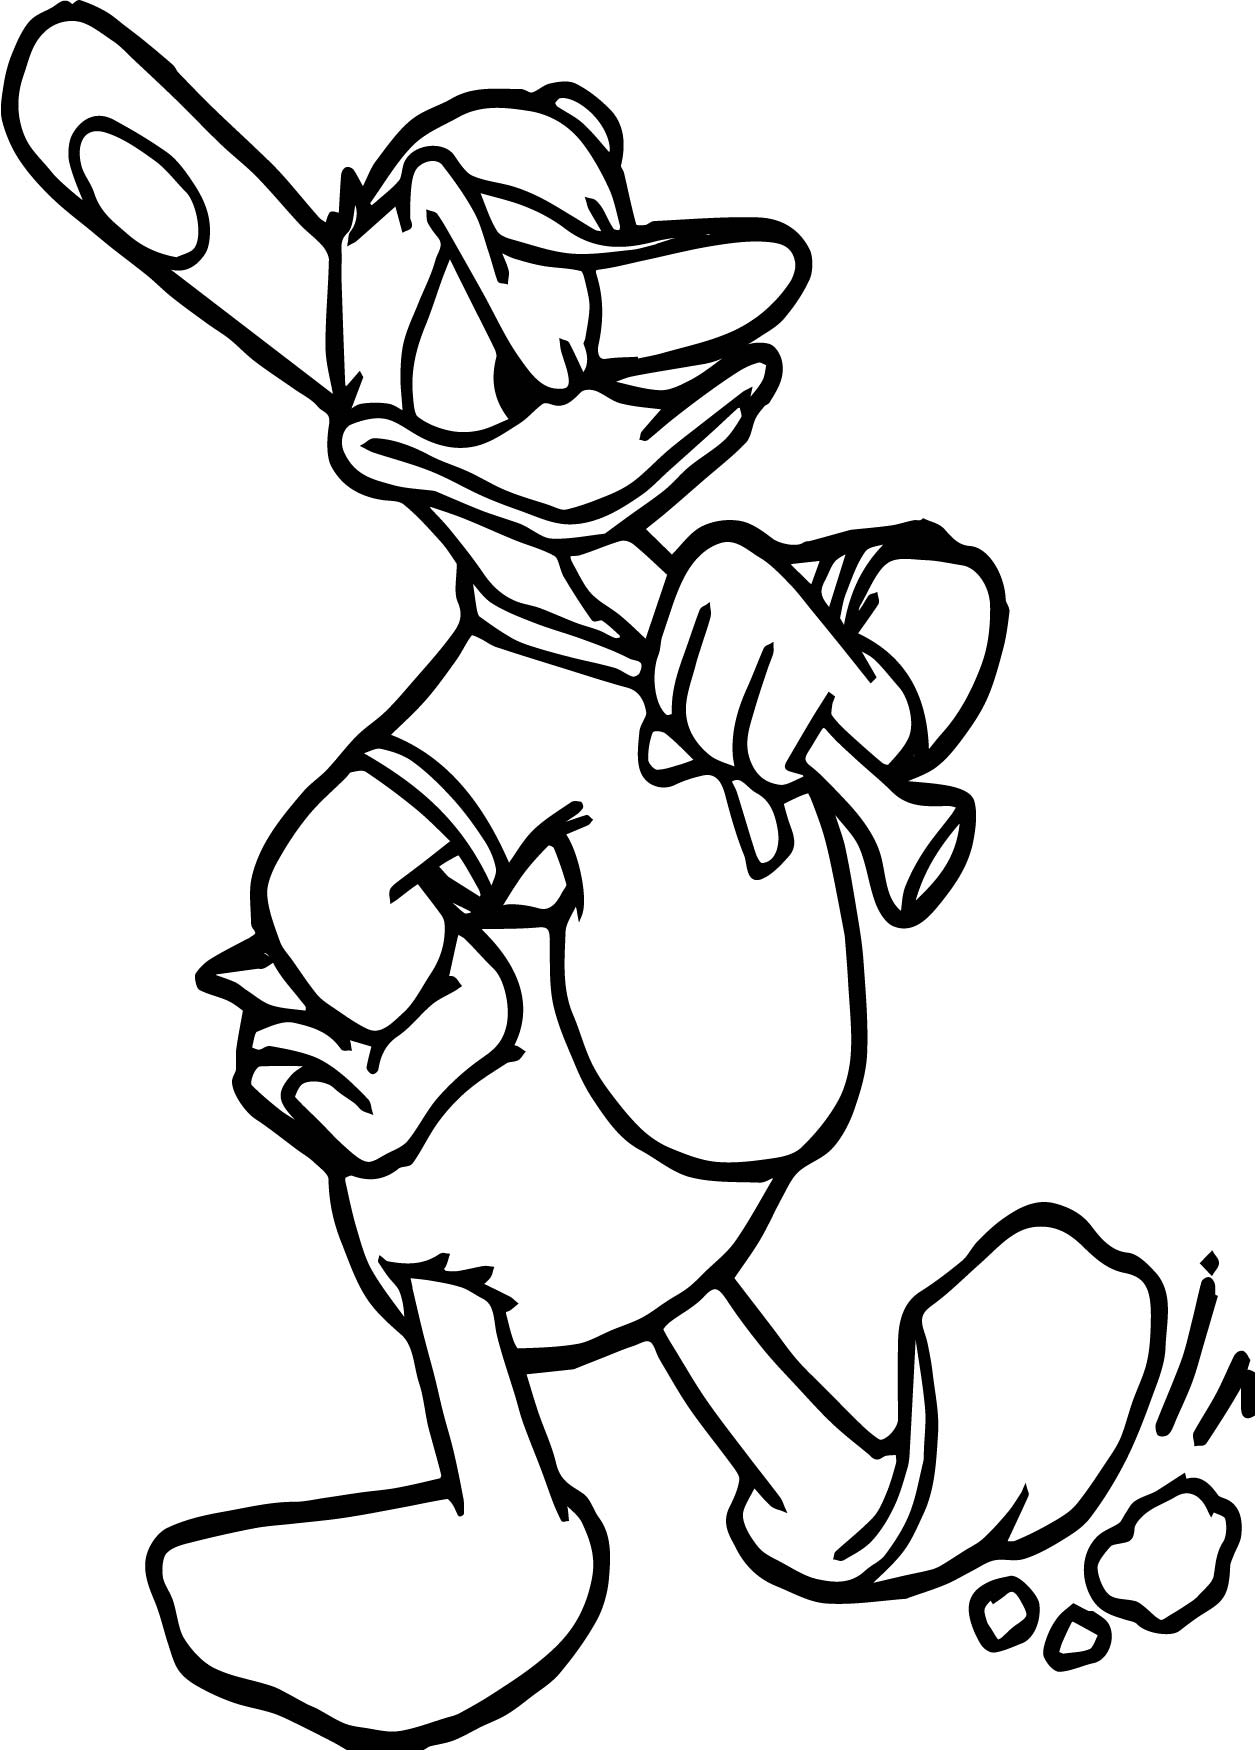 Coloring Page Duck Super Donald Duck Coloring Page Bat Playing Baseball Best Free